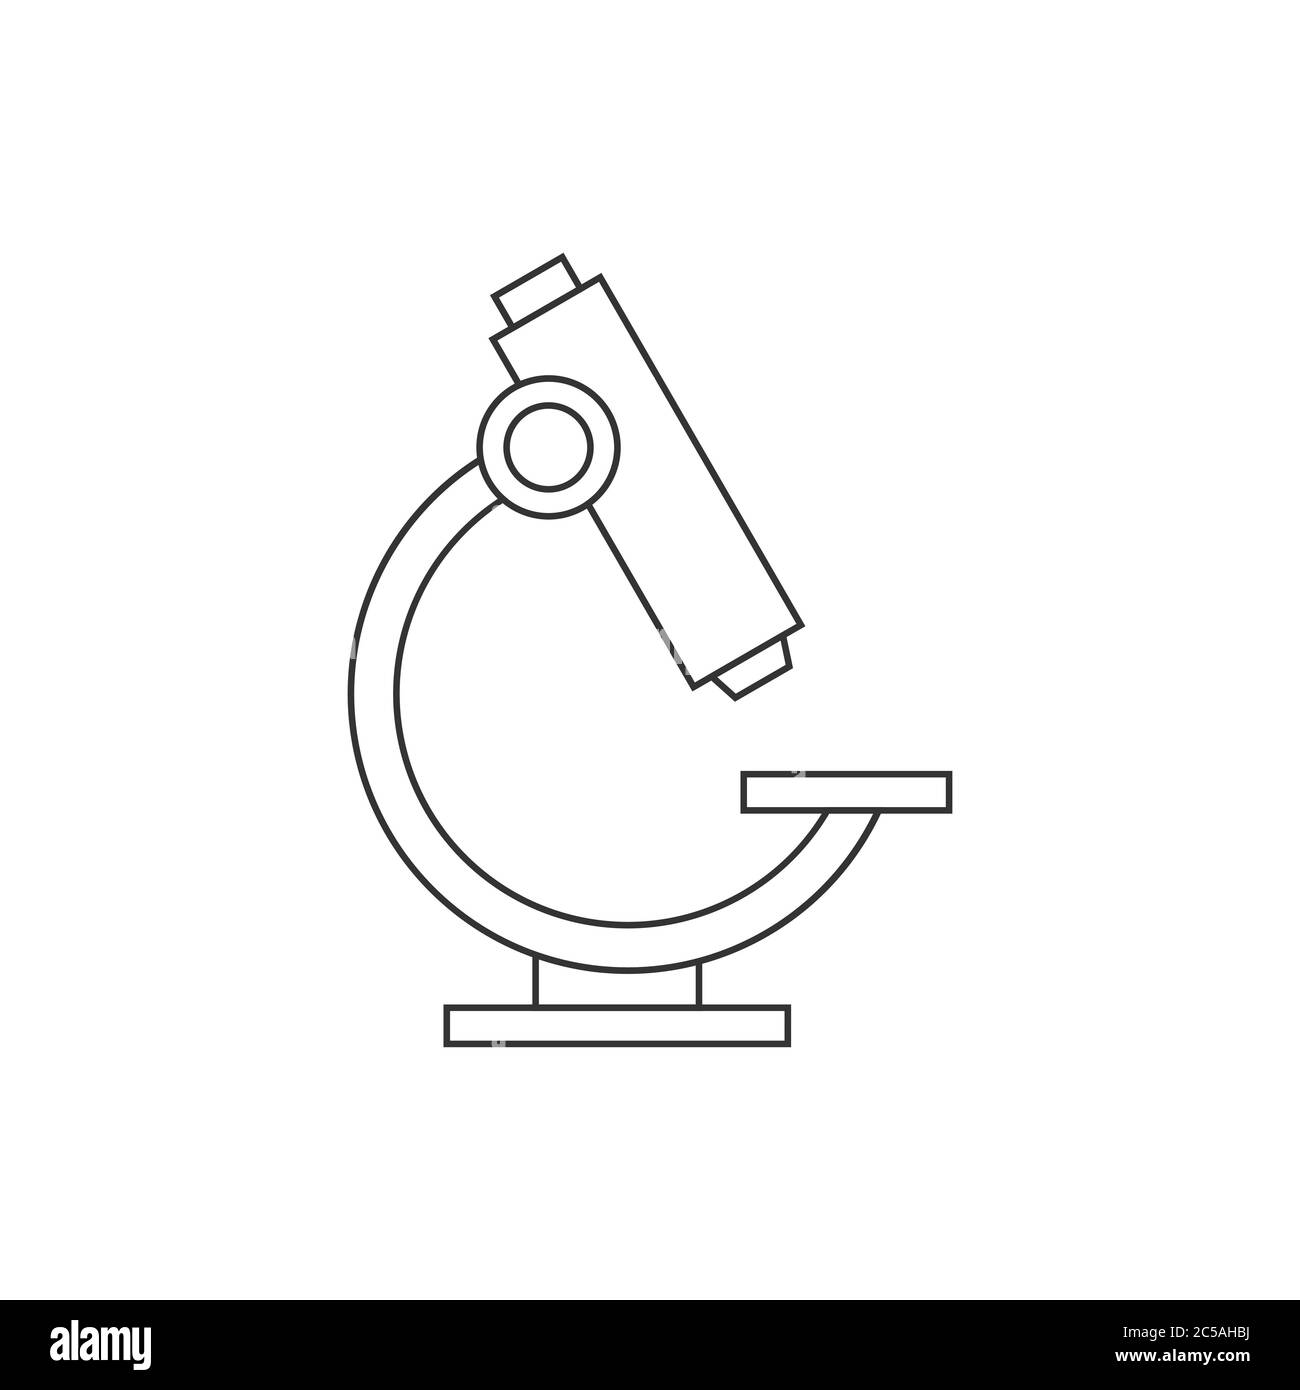 Simple microscope line icon. Black outline on white background. An instrument that enlarges image of small objects. Scientific lab equipment. Vector Stock Vector